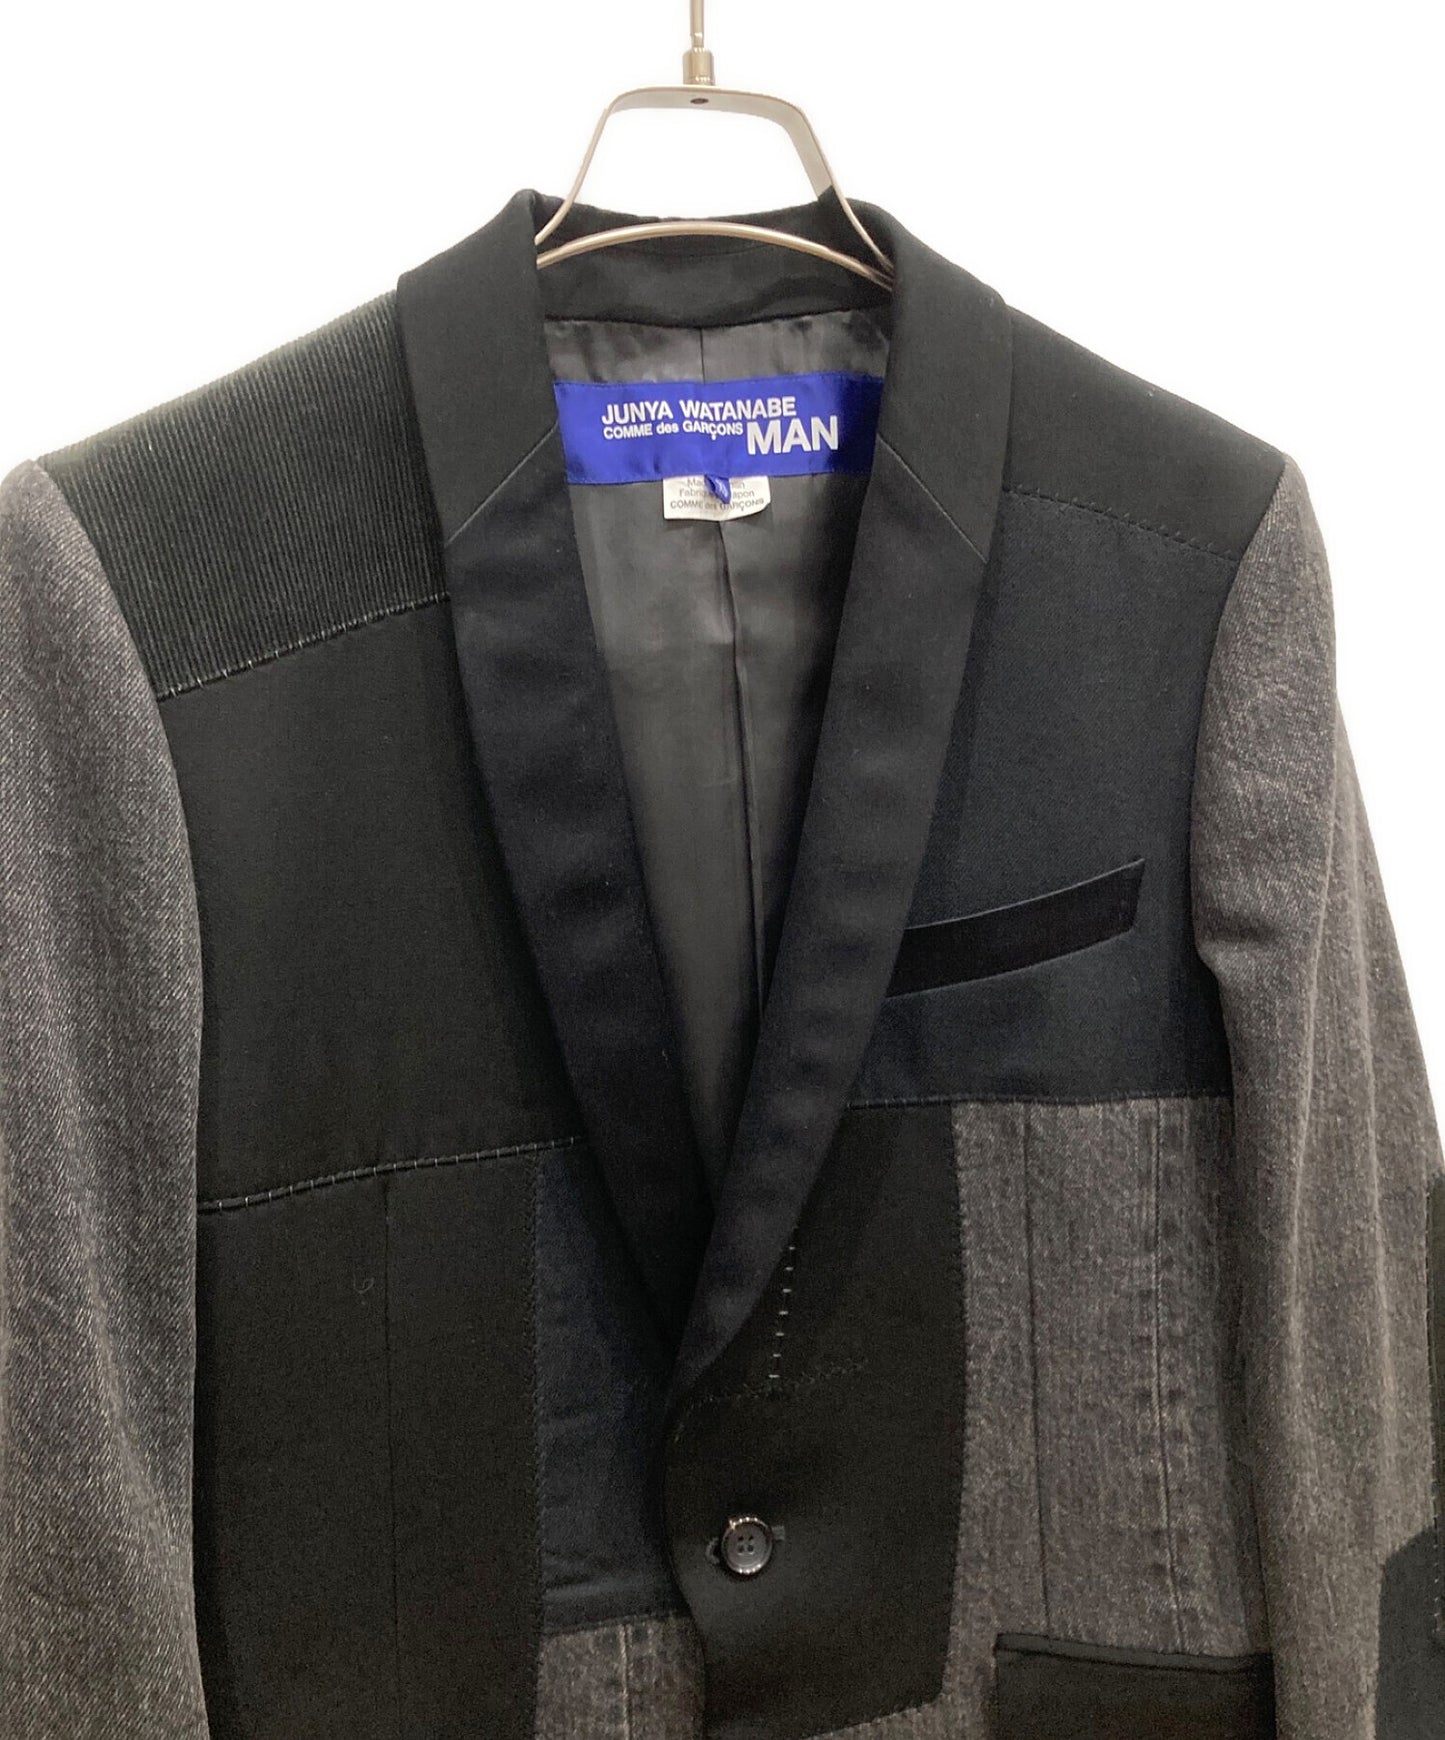 [Pre-owned] COMME des GARCONS JUNYA WATANABE MAN Tuxedo Patchwork Jacket WP-J013 / AD2015 / 15AW Denim Crazy Pattern Docking wp-j013 / ad2015 / 15aw